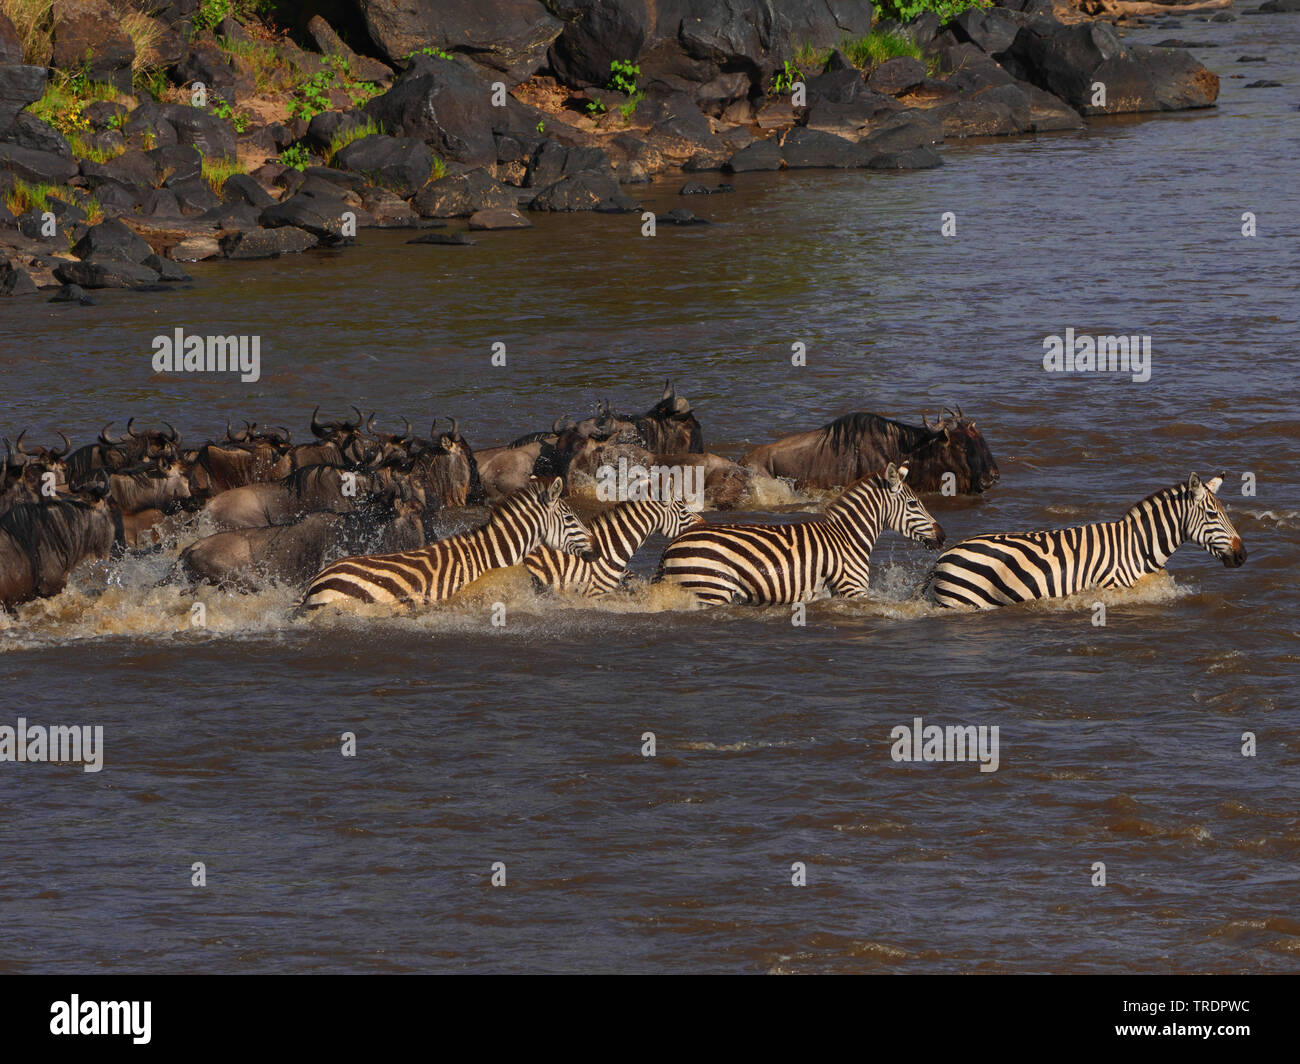 Eastern White-bearded Wildebeest (Connochaetes taurinus albojubatus), herd of wildebeests crossing a river together with zebras, side view, Kenya, Masai Mara National Park Stock Photo